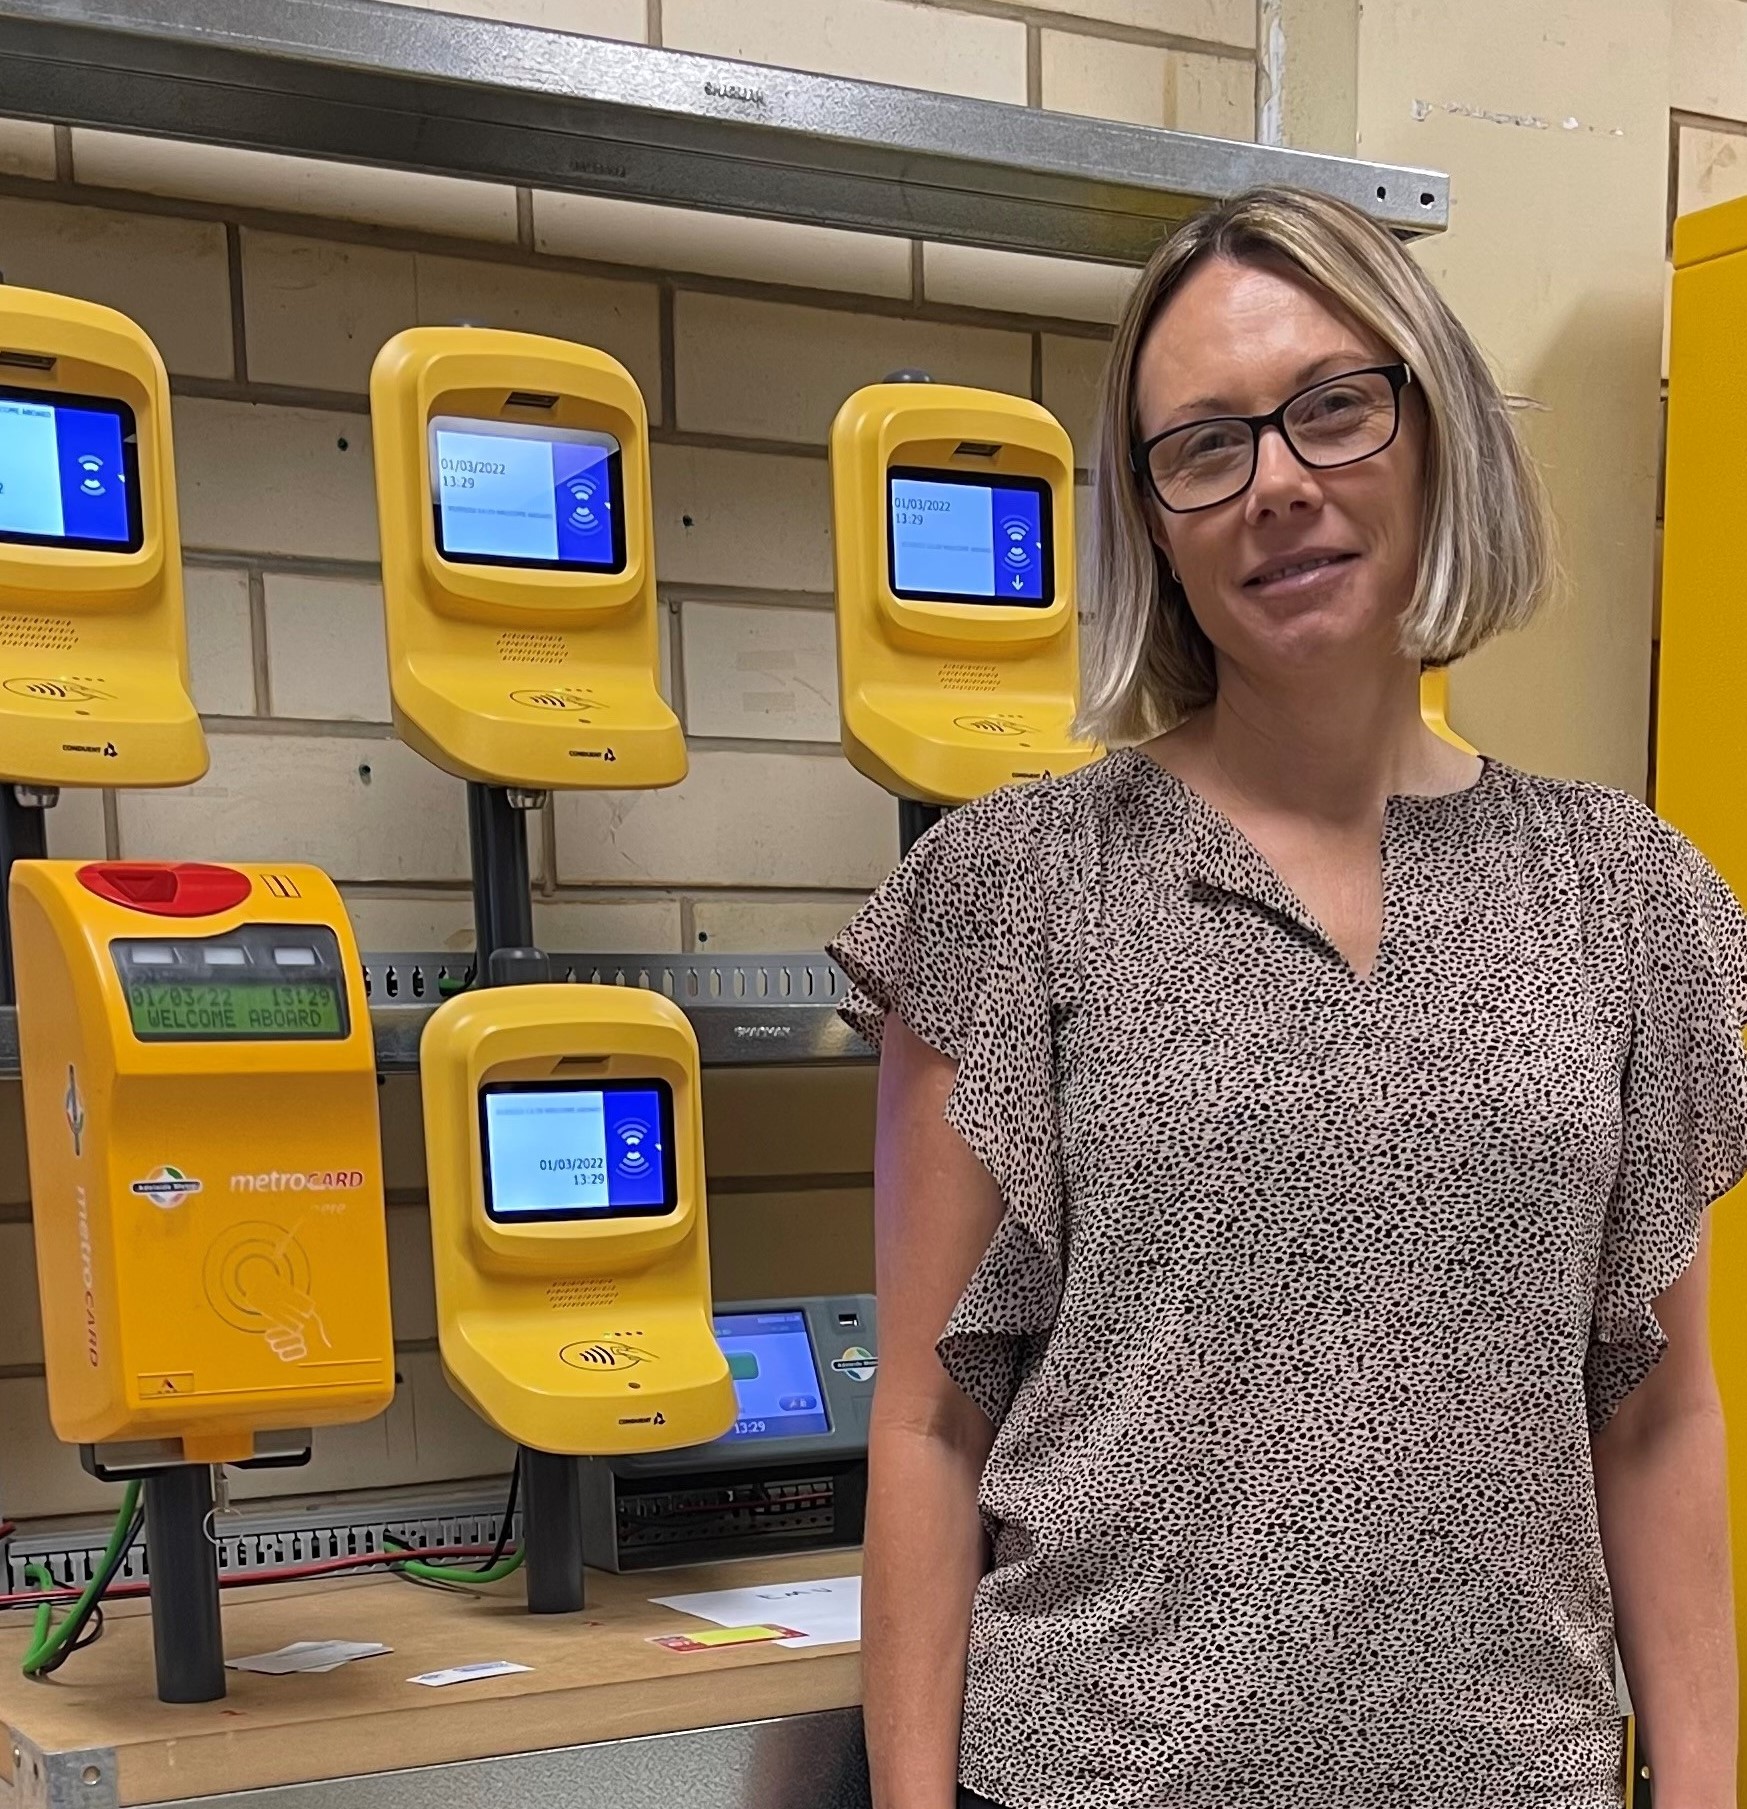 Tammy has blonde hair which is cut to about-chin length. She is wearing dark framed glasses and is wearing a brown office shirt. She is standing infront of yellow Adelaide Metro ticketing machines